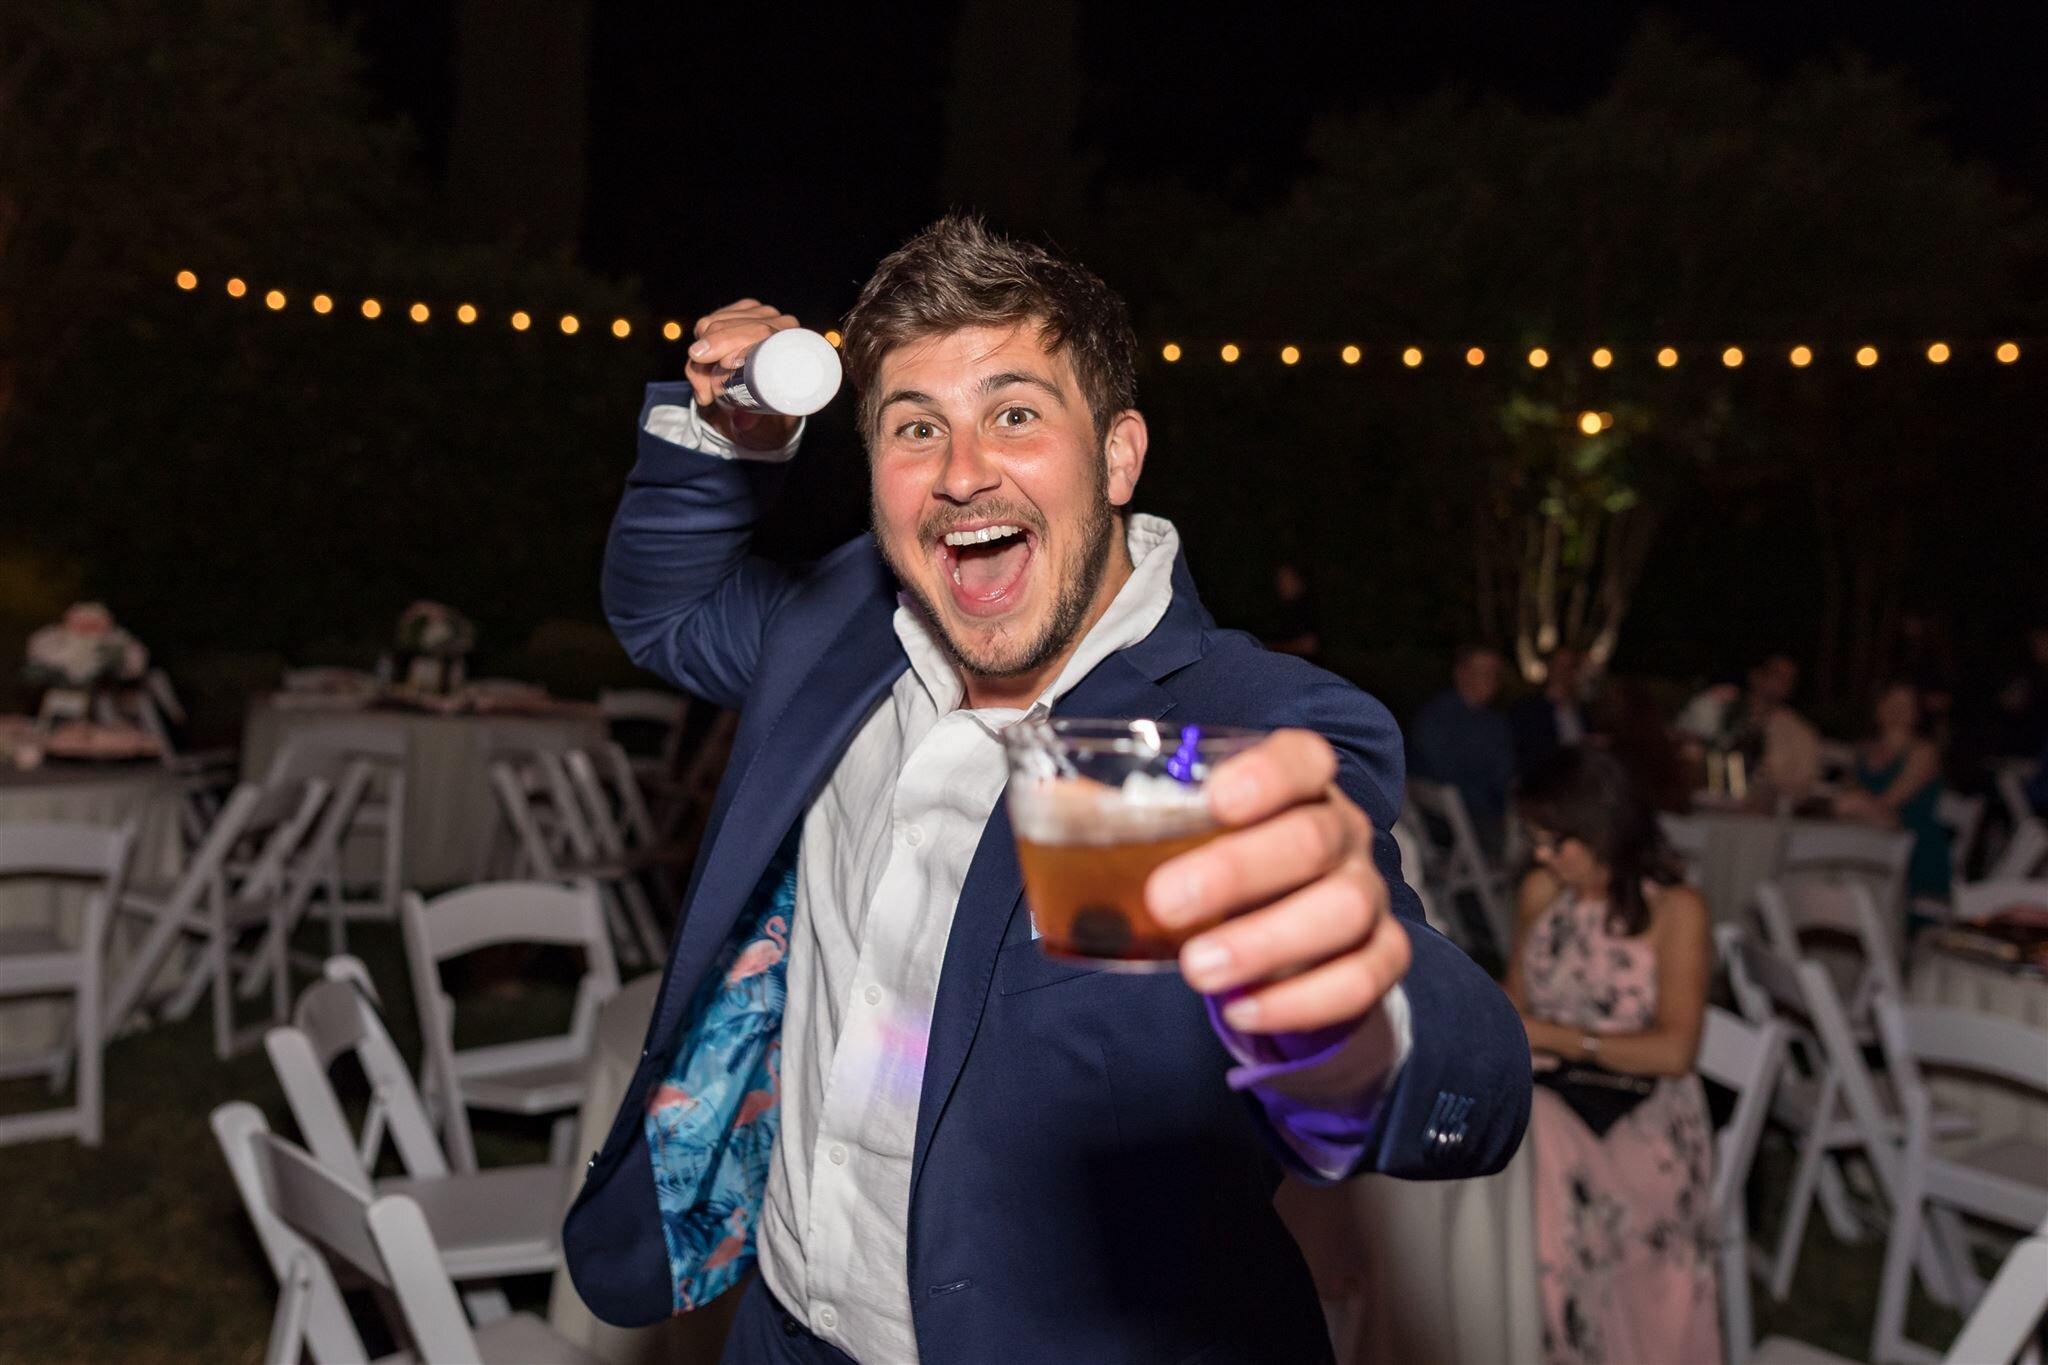 The SideCar Mobile Bar can be at your wedding or event, and you can be as happy as this guy!  We can bring our bar service to you!  Our service includes at least 2 bartenders. 
#weddings #chicoweddings #buttecountyweddings #forestranchca #weddingvenu